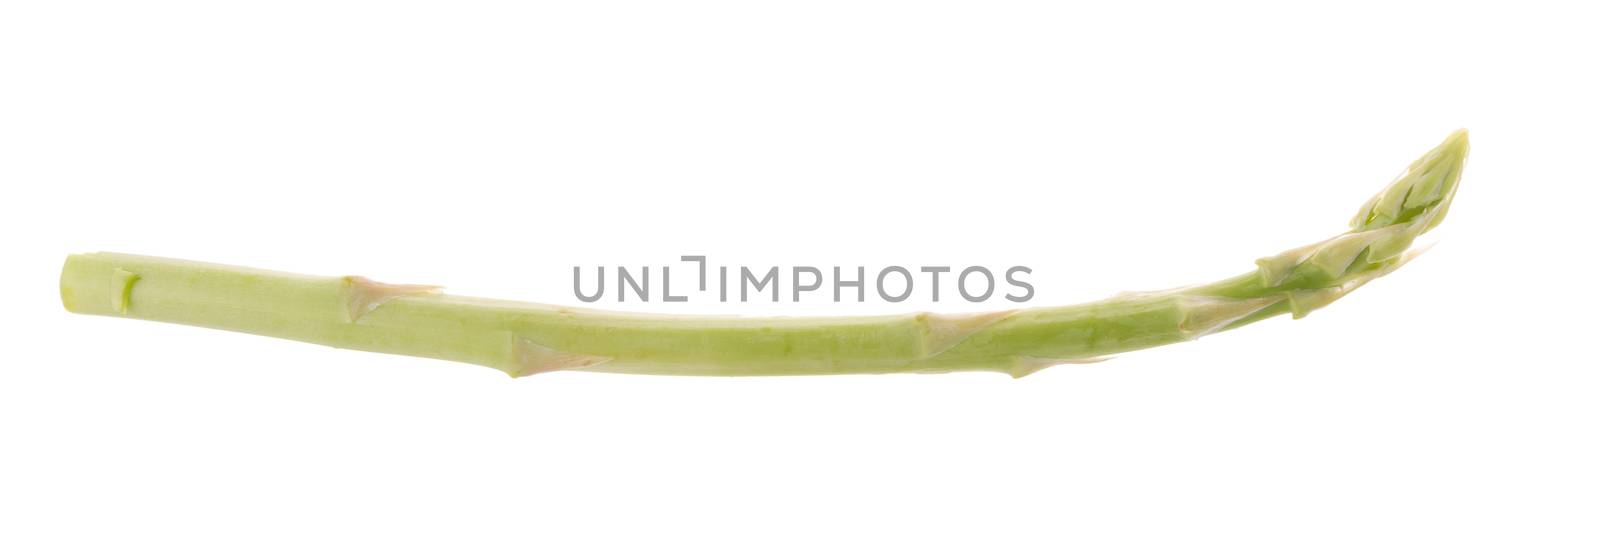 Bunch of green asparagus isolated on white background by kaiskynet